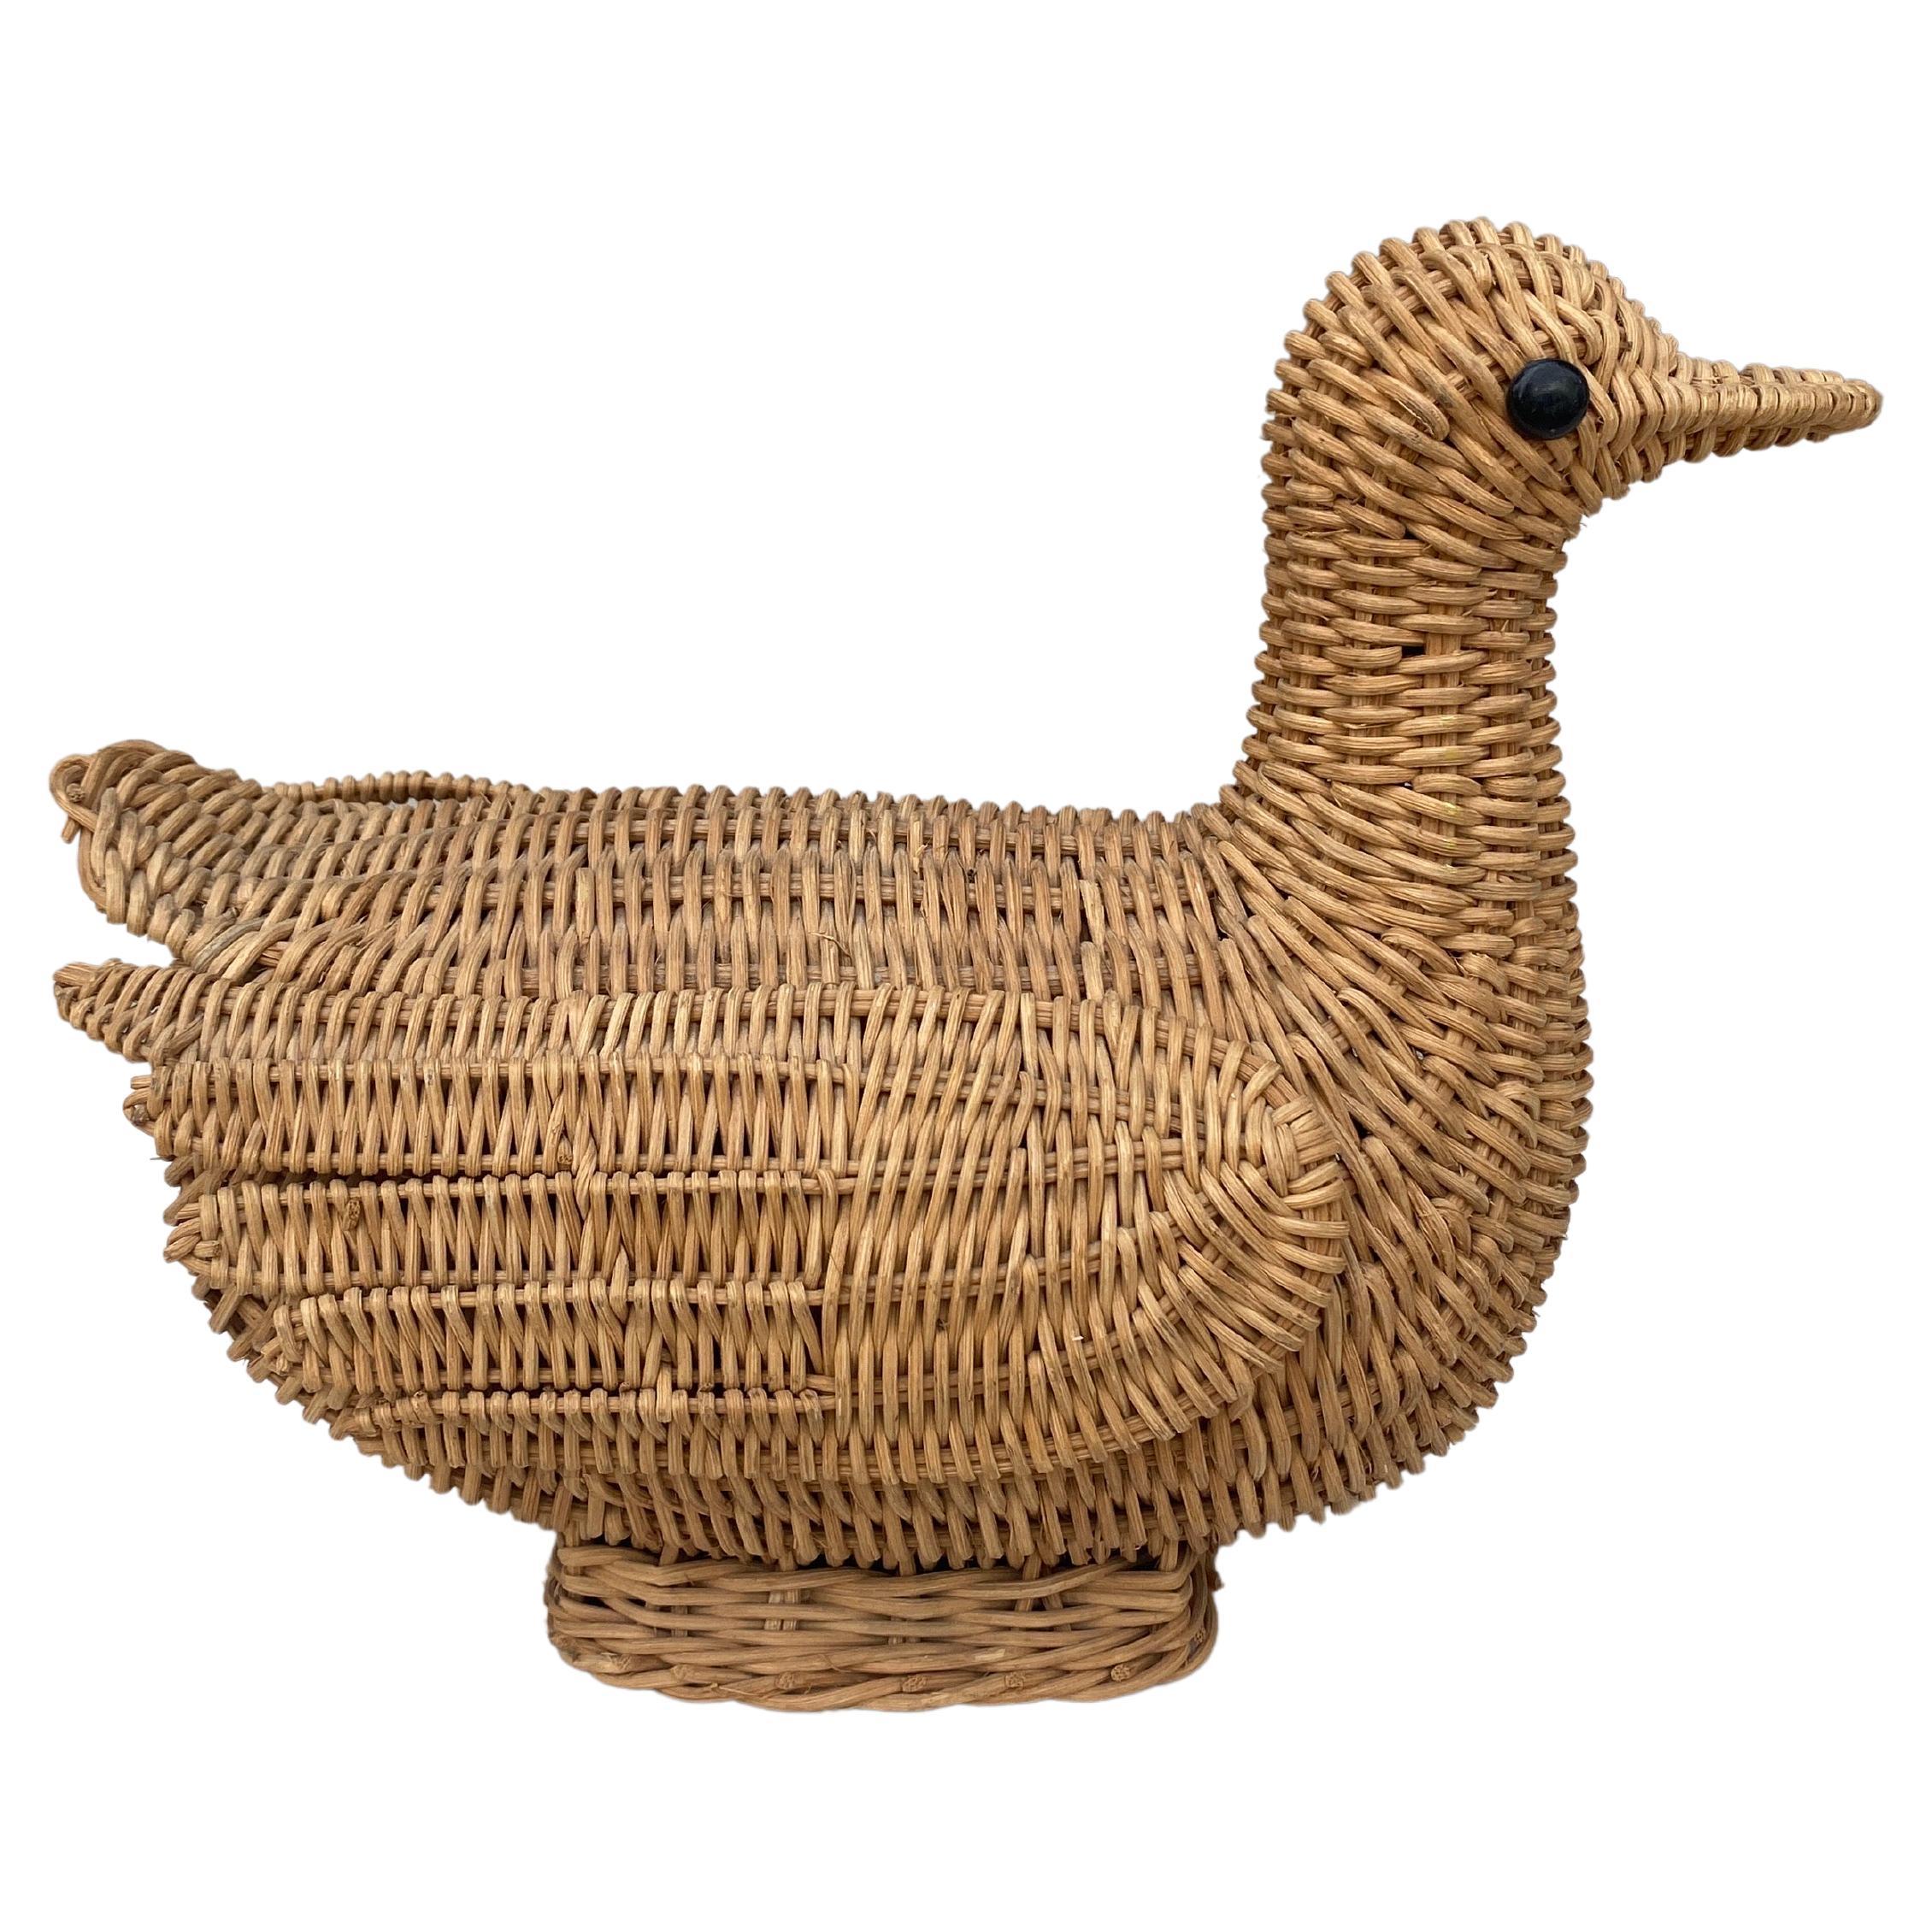 Mid-20th Century French Mid-Century Wicker Duck For Sale